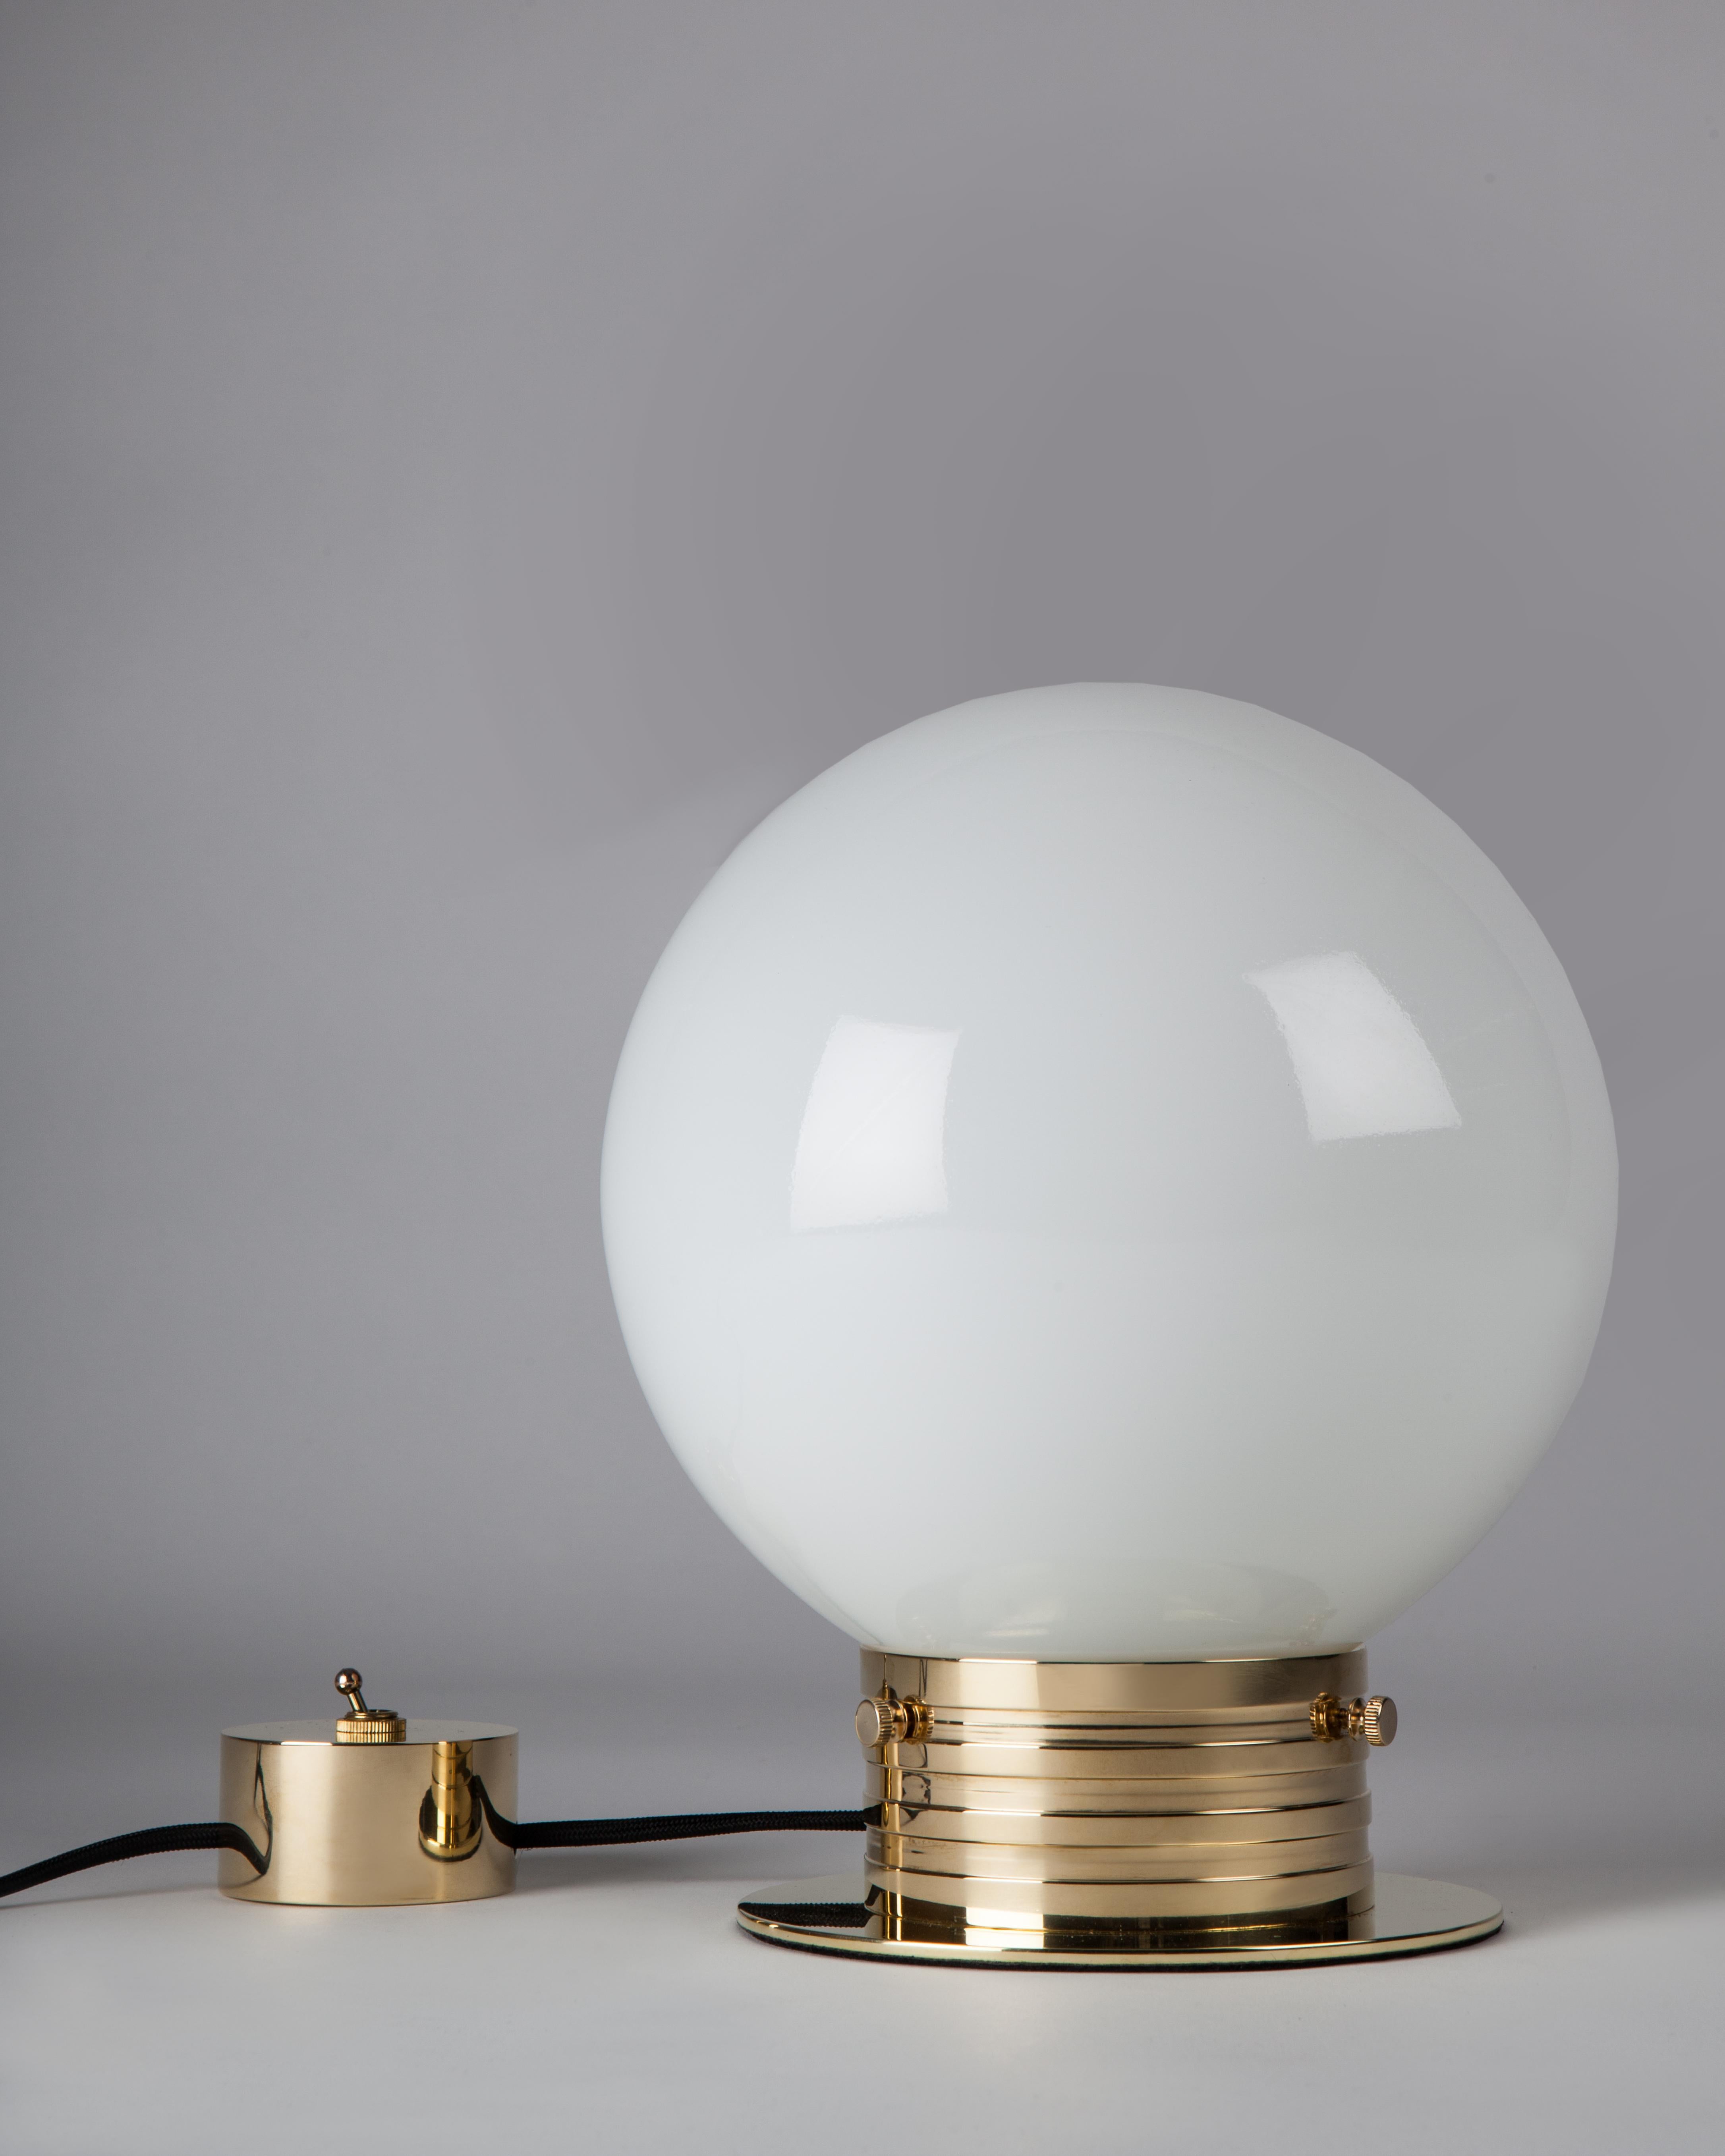 CTL3310
A utilitarian design with luxurious materials: the turned solid brass ribbed neck base of the Commune Globe Table Lamp holds a hand-blown white milk glass globe shade. A decorative cylinder form toggle switch mirrors the other round